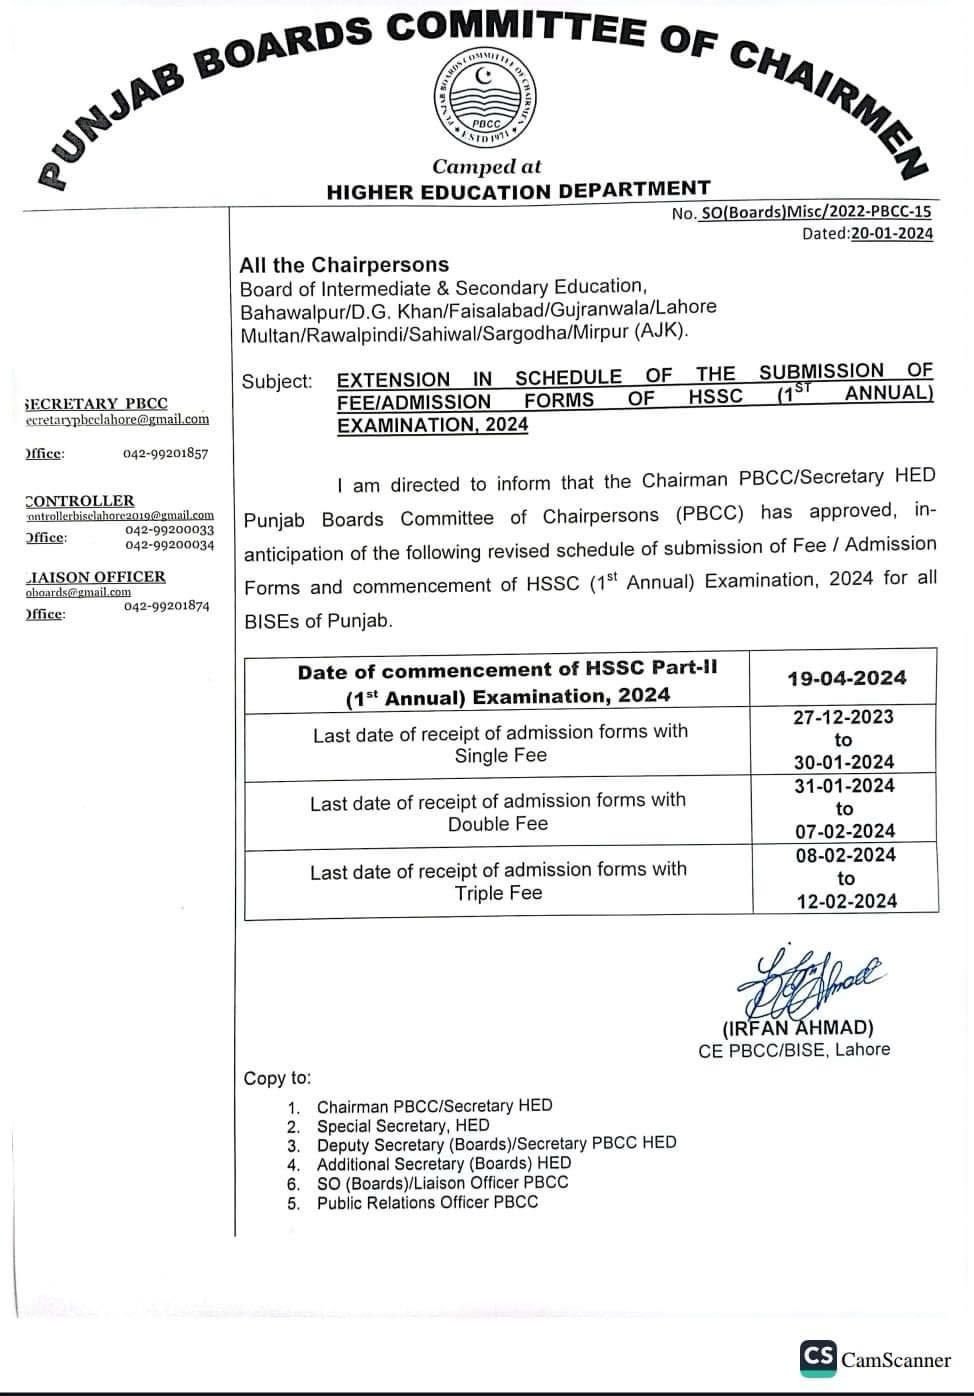 Date of commencement of HSSC Part-I (1st Annual) Examination,2024: 07-05-2024